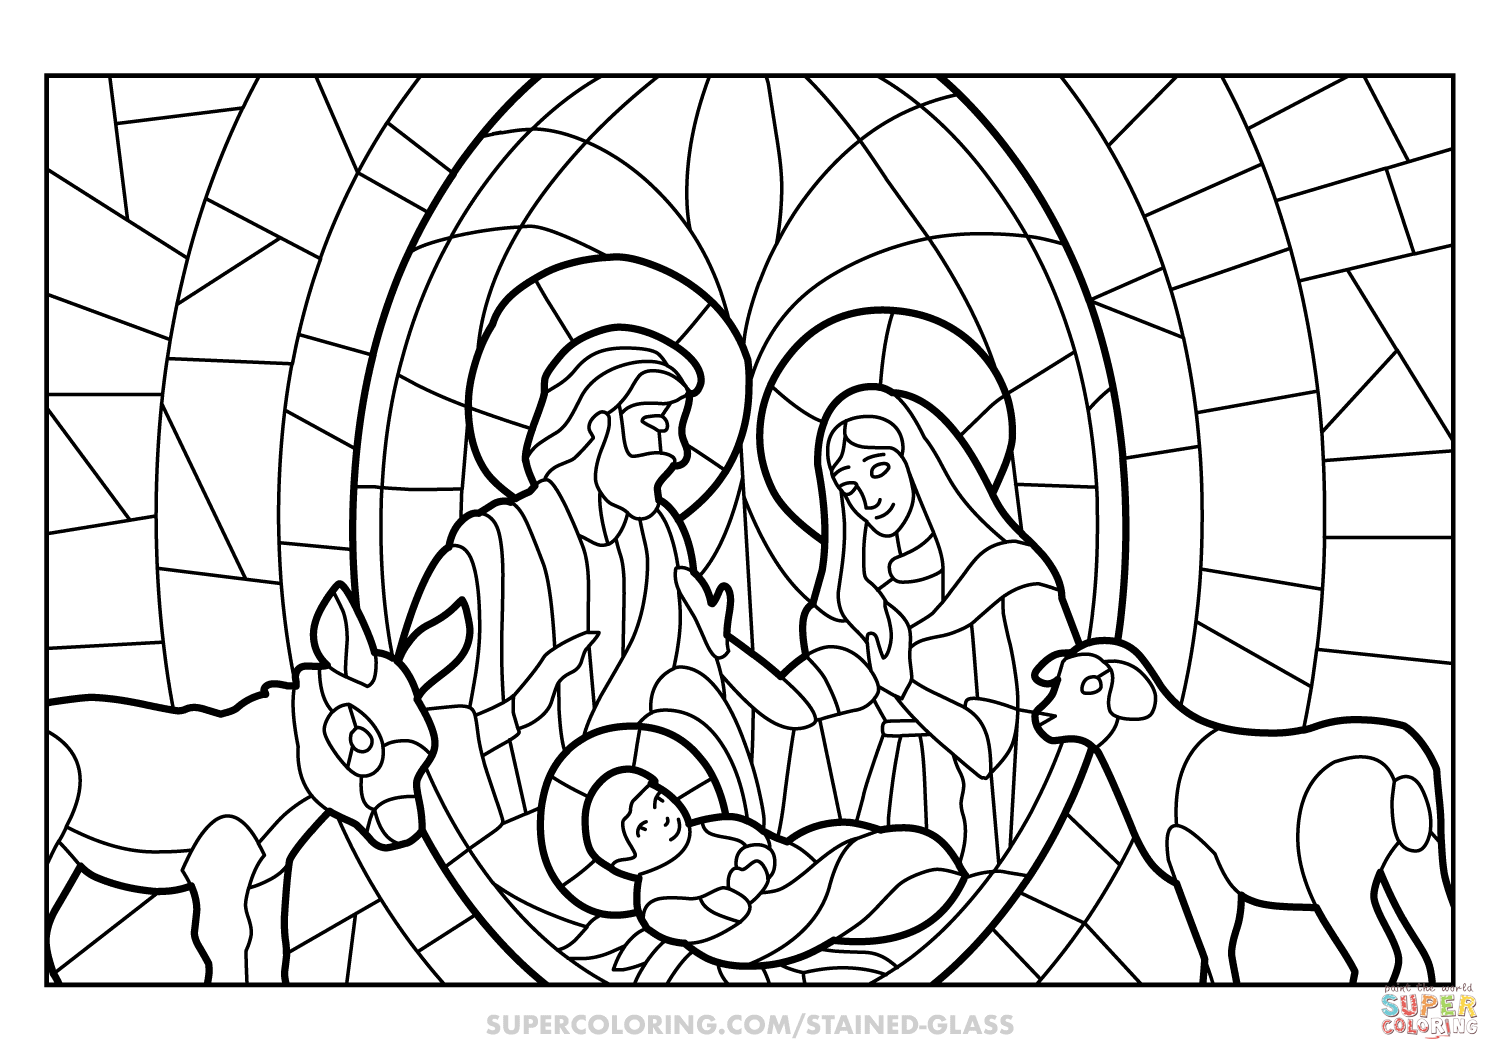 Christmas nativity scene stained glass coloring page free printable coloring pages